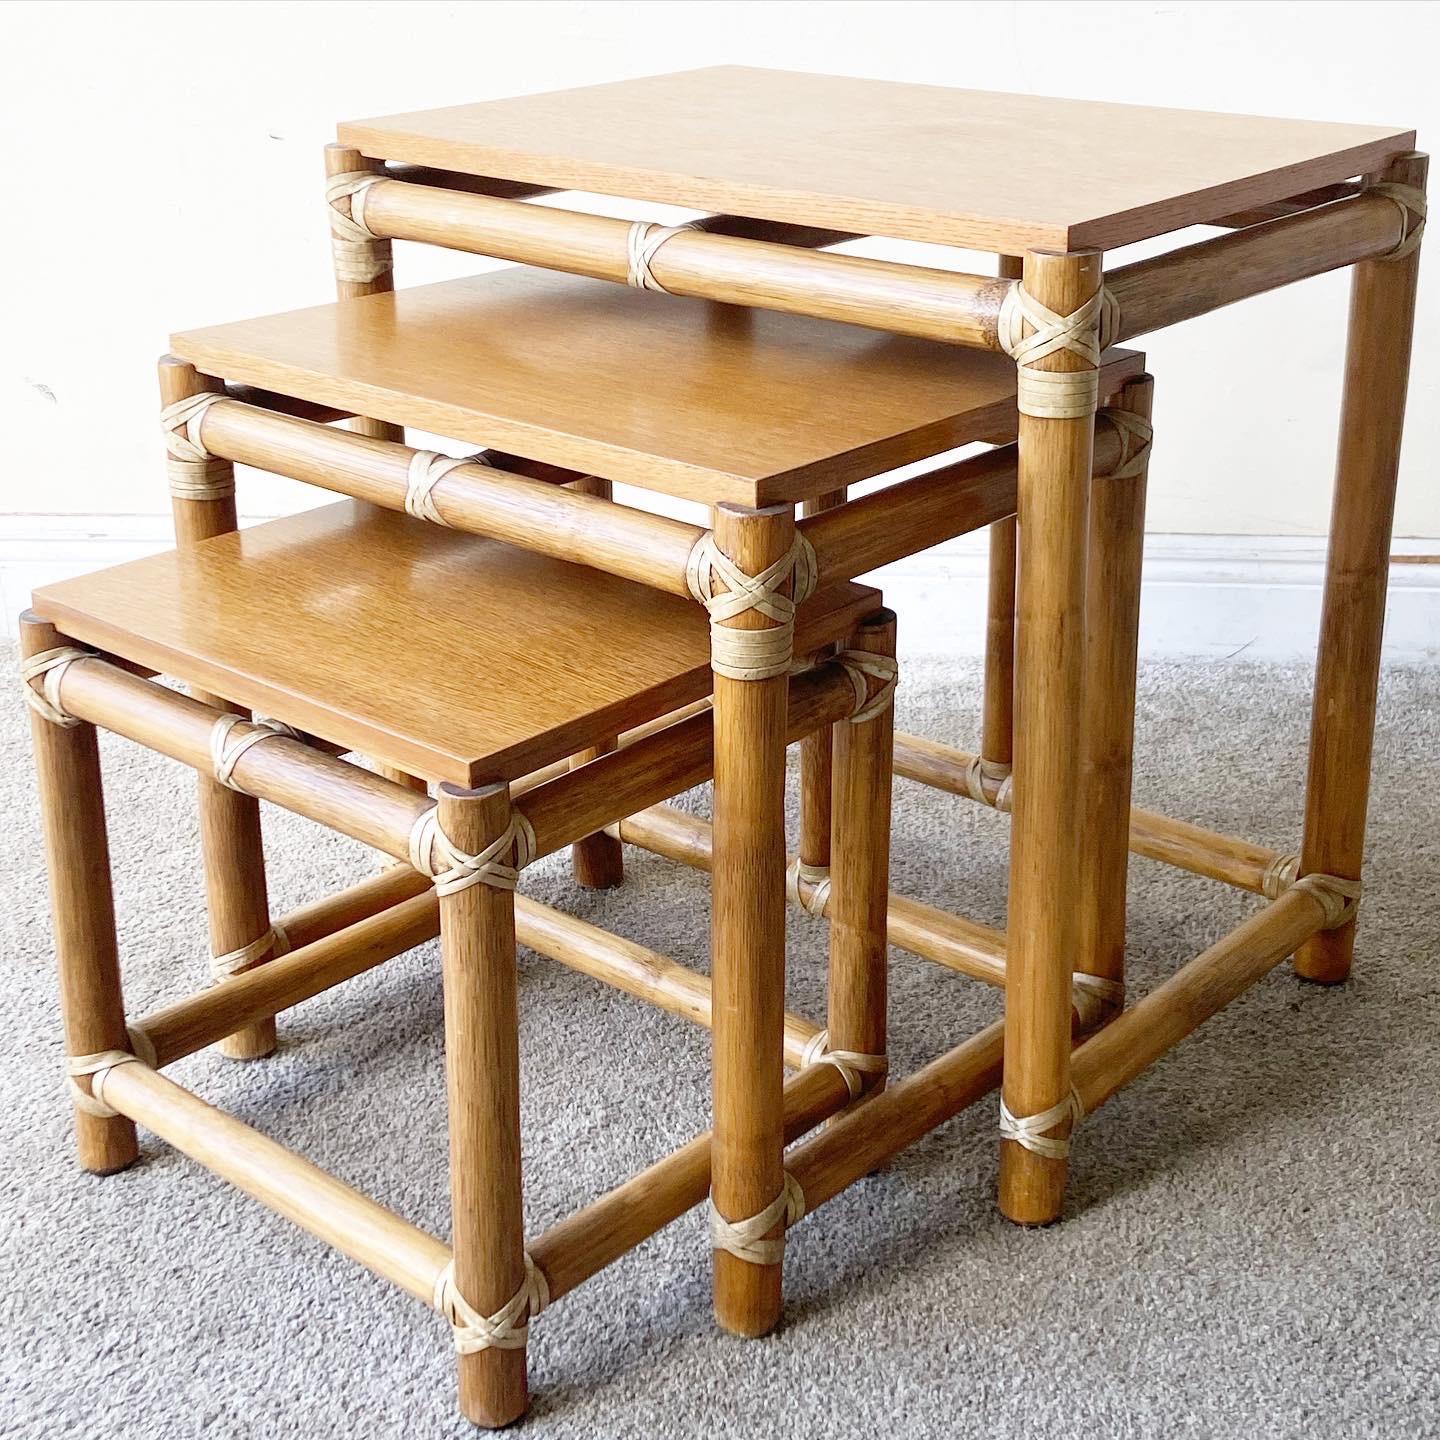 Exceptionally crafted bamboo rattan nesting tables by McGuire Furniture Co. Each table is fitted perfectly for a seamless nesting experience on the tables behalf.


Measures: Smallest table: 15”W, 13”D, 14.75”H
Middle table: 19”W, 14.5”D,